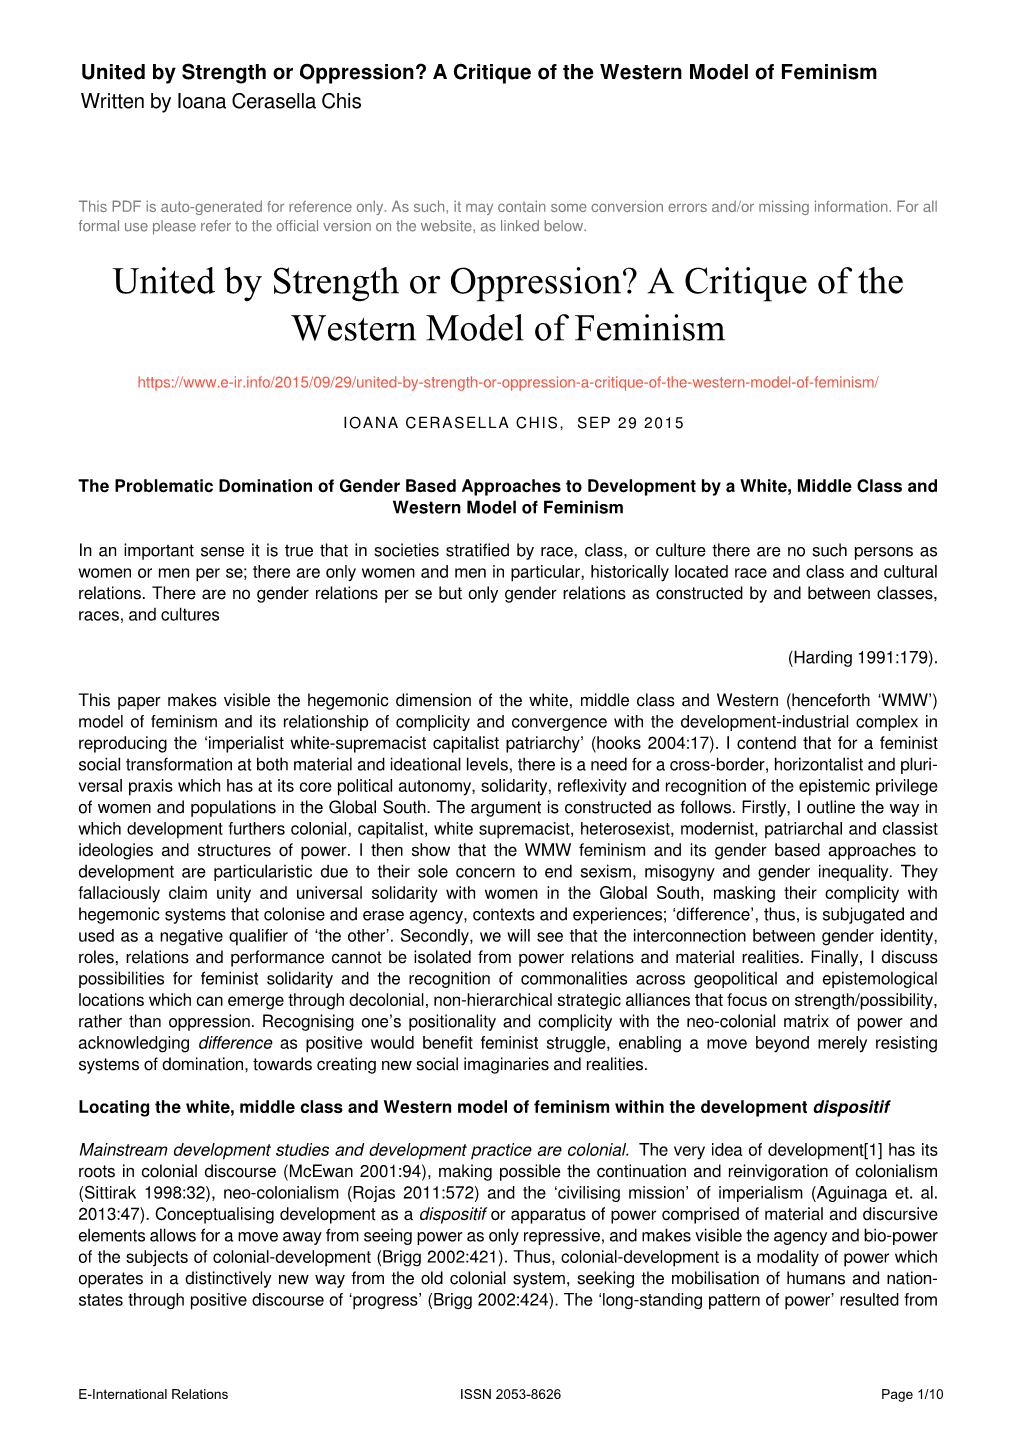 United by Strength Or Oppression? a Critique of the Western Model of Feminism Written by Ioana Cerasella Chis